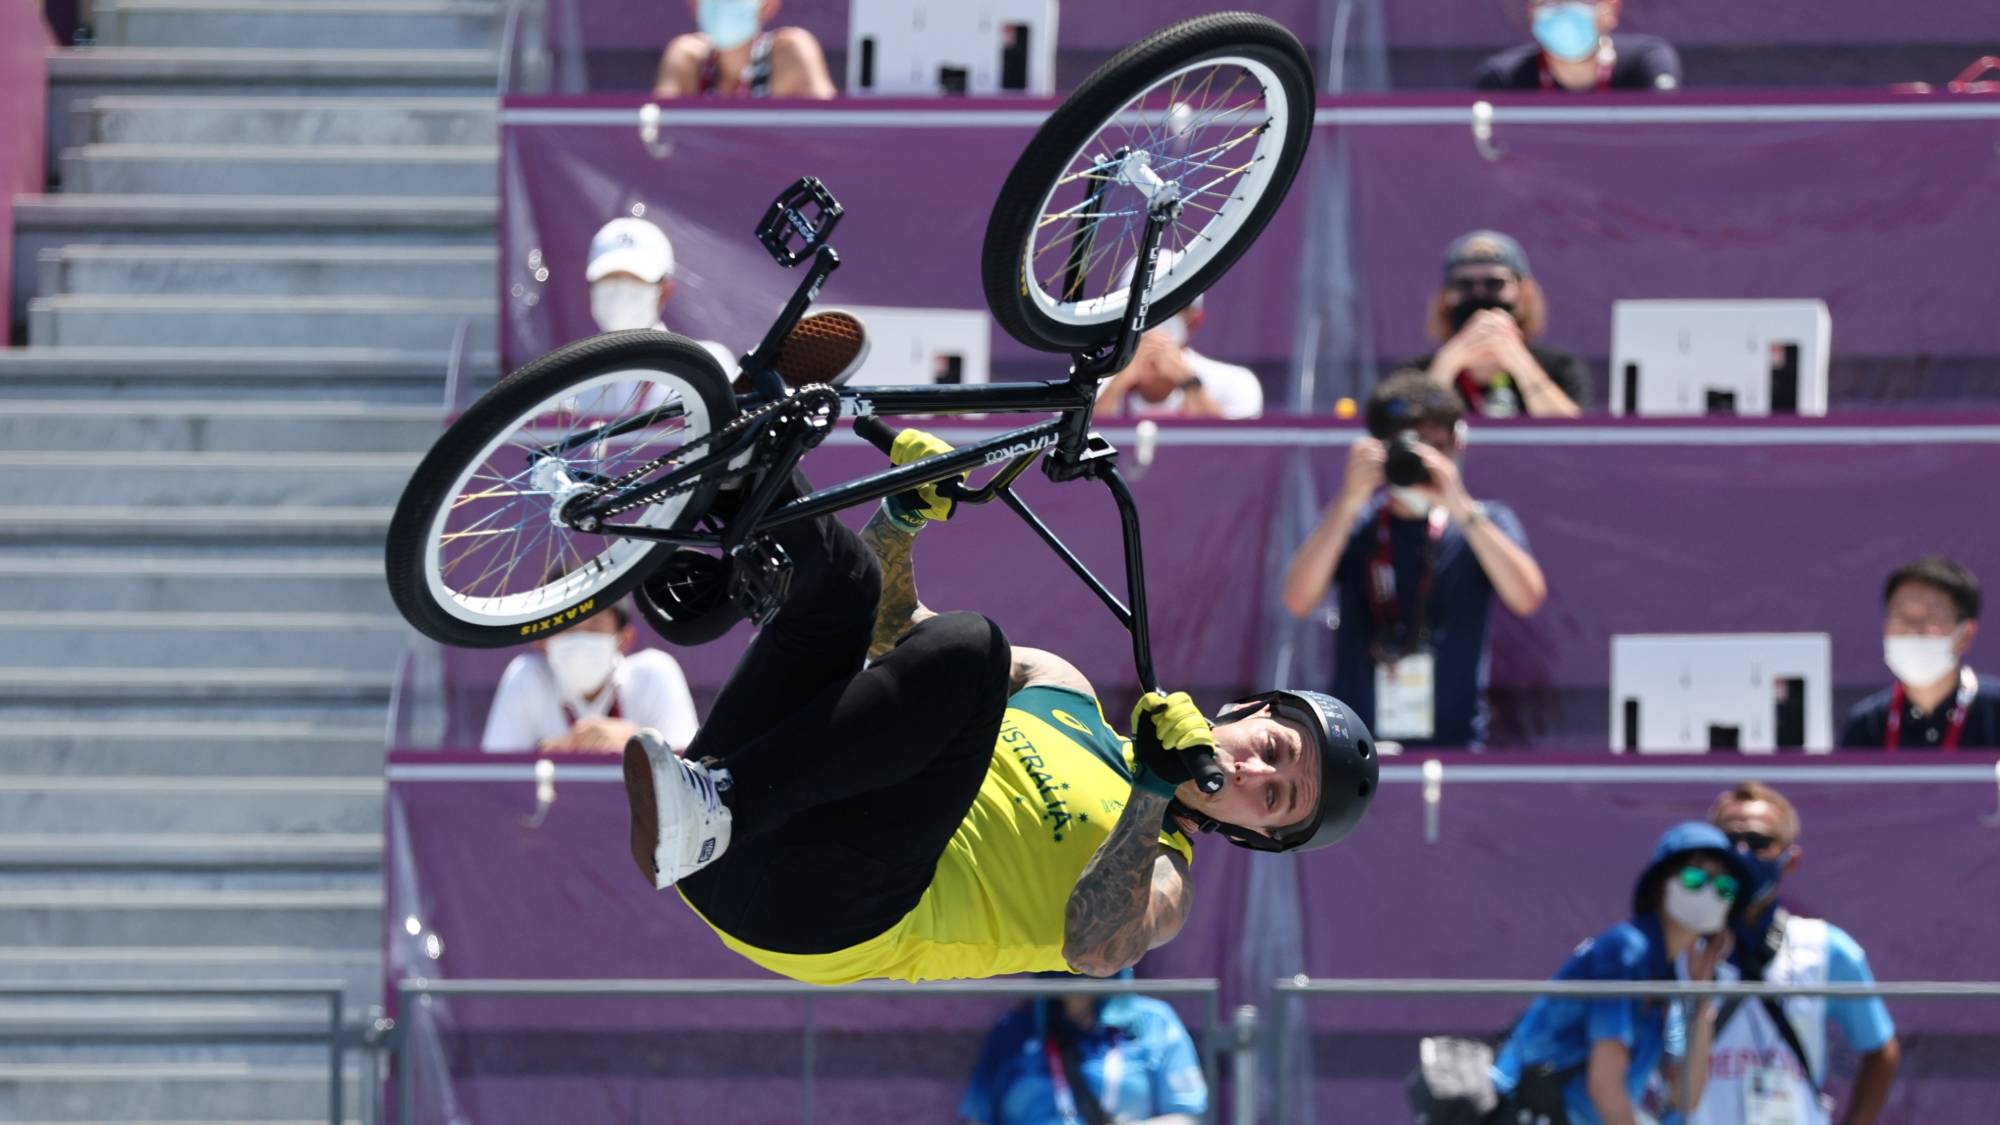 Thrills, spills and gravity-defying tricks as BMX freestyle debuts at Tokyo  Games - The Japan Times